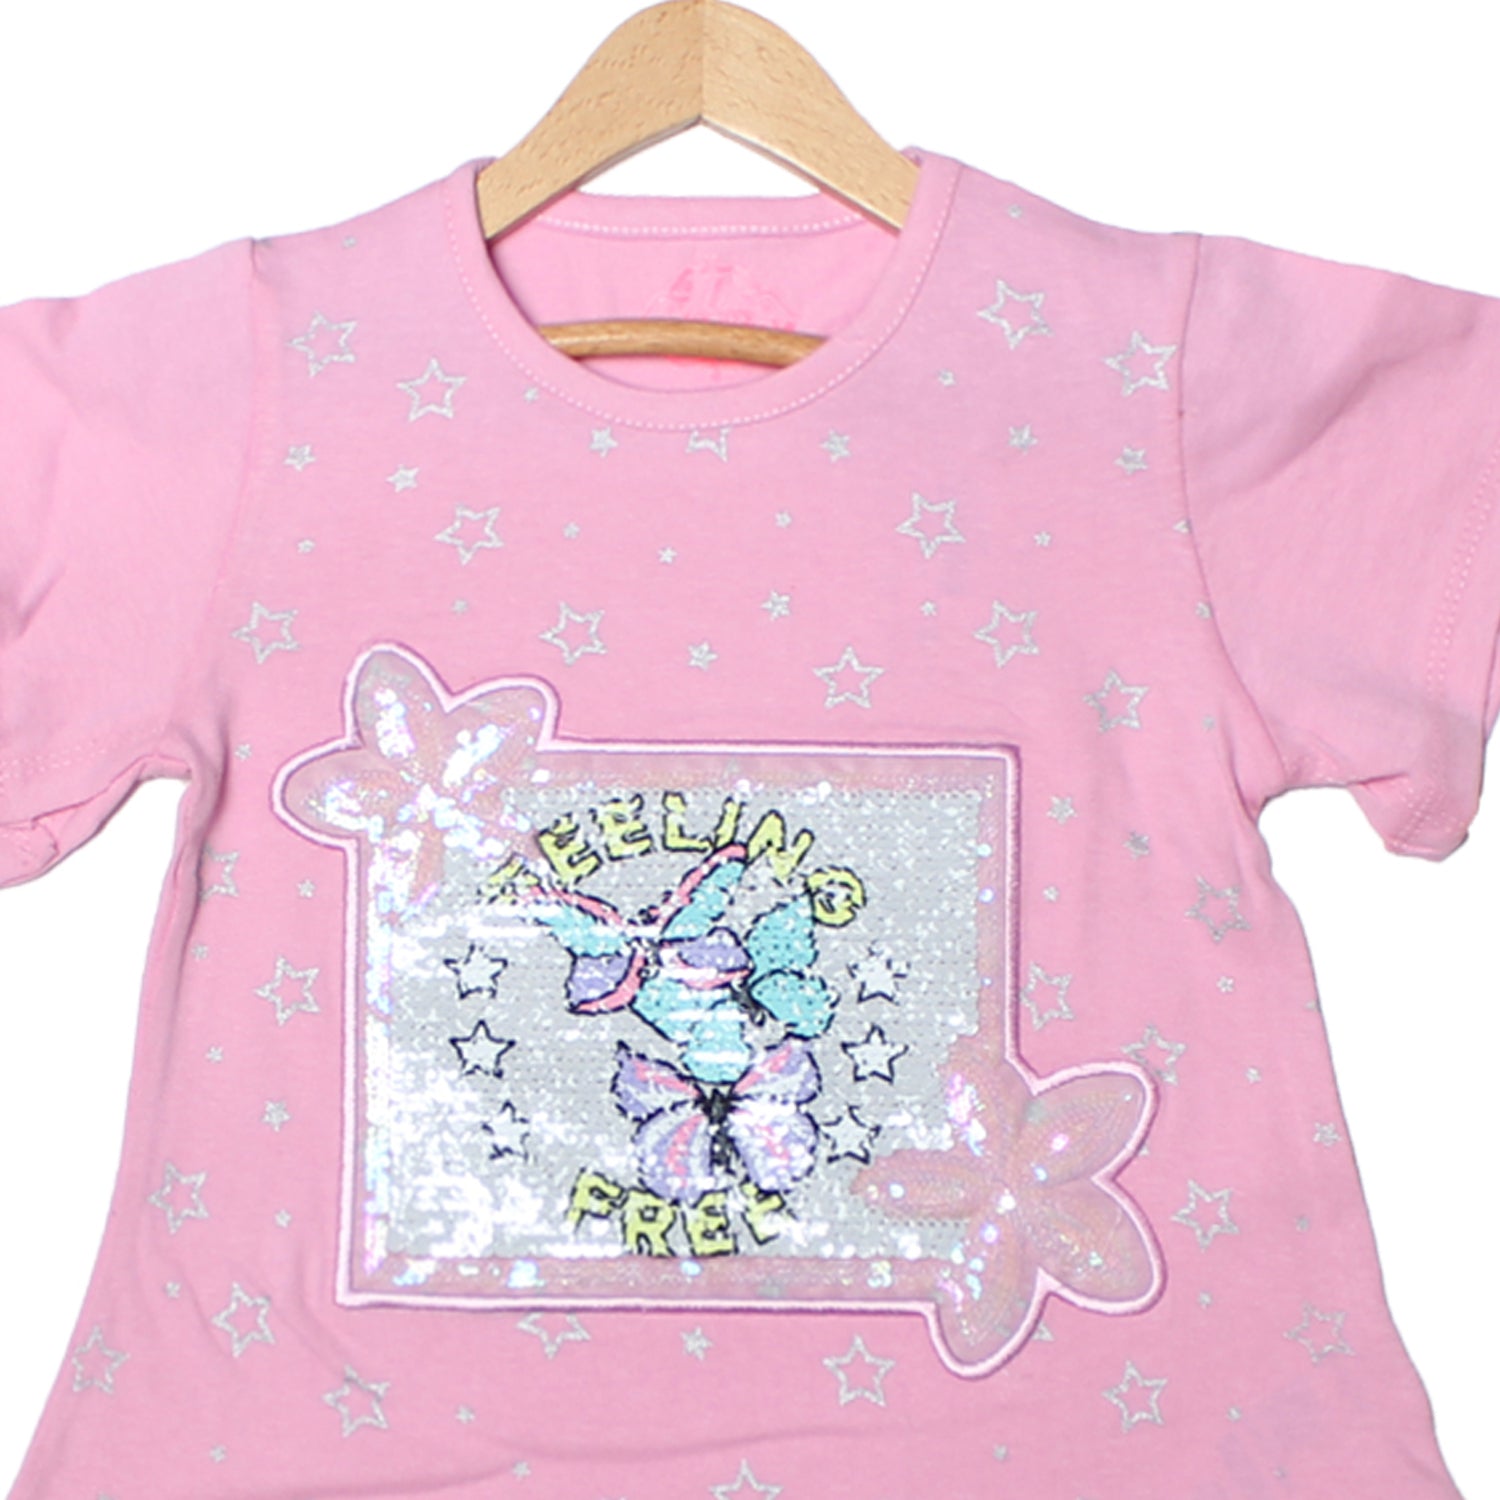 NEW PINK BUTTERFLY PATCH PRINTED T-SHIRT TOP FOR GIRLS